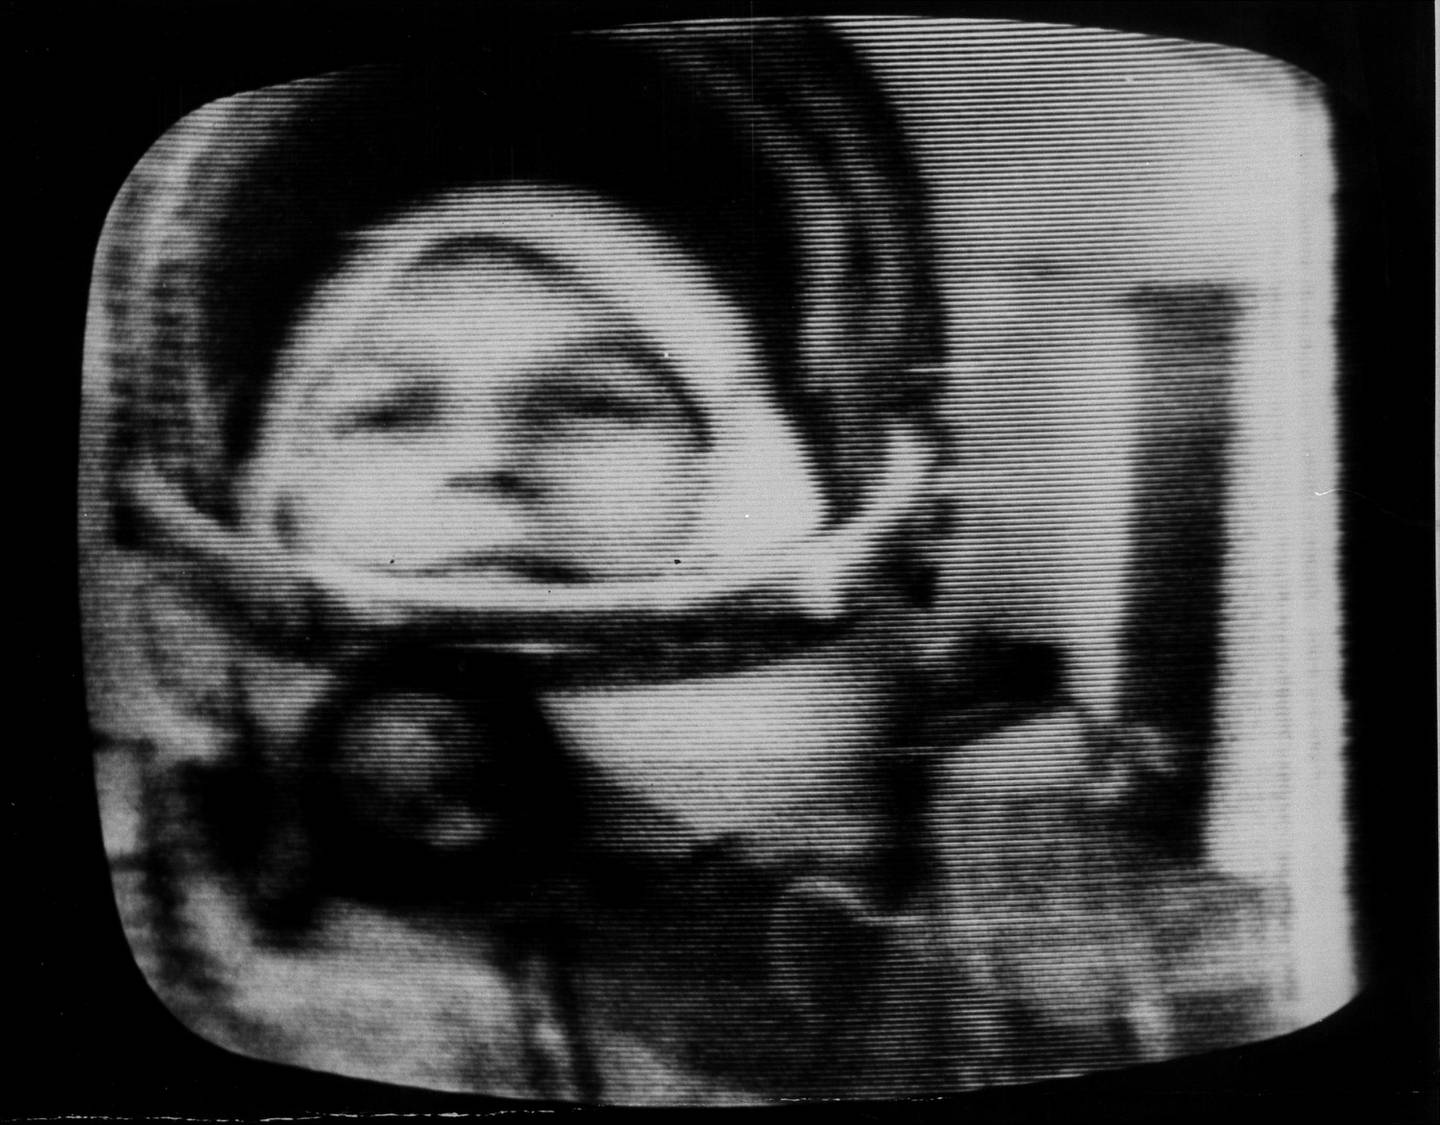 26 year old Valentina Tereshkova, who became the first woman to travel in space, is pictured as seen in a television transmission from her space craft, Vostok 6, June 16, 1963.  (AP photo/Tass)